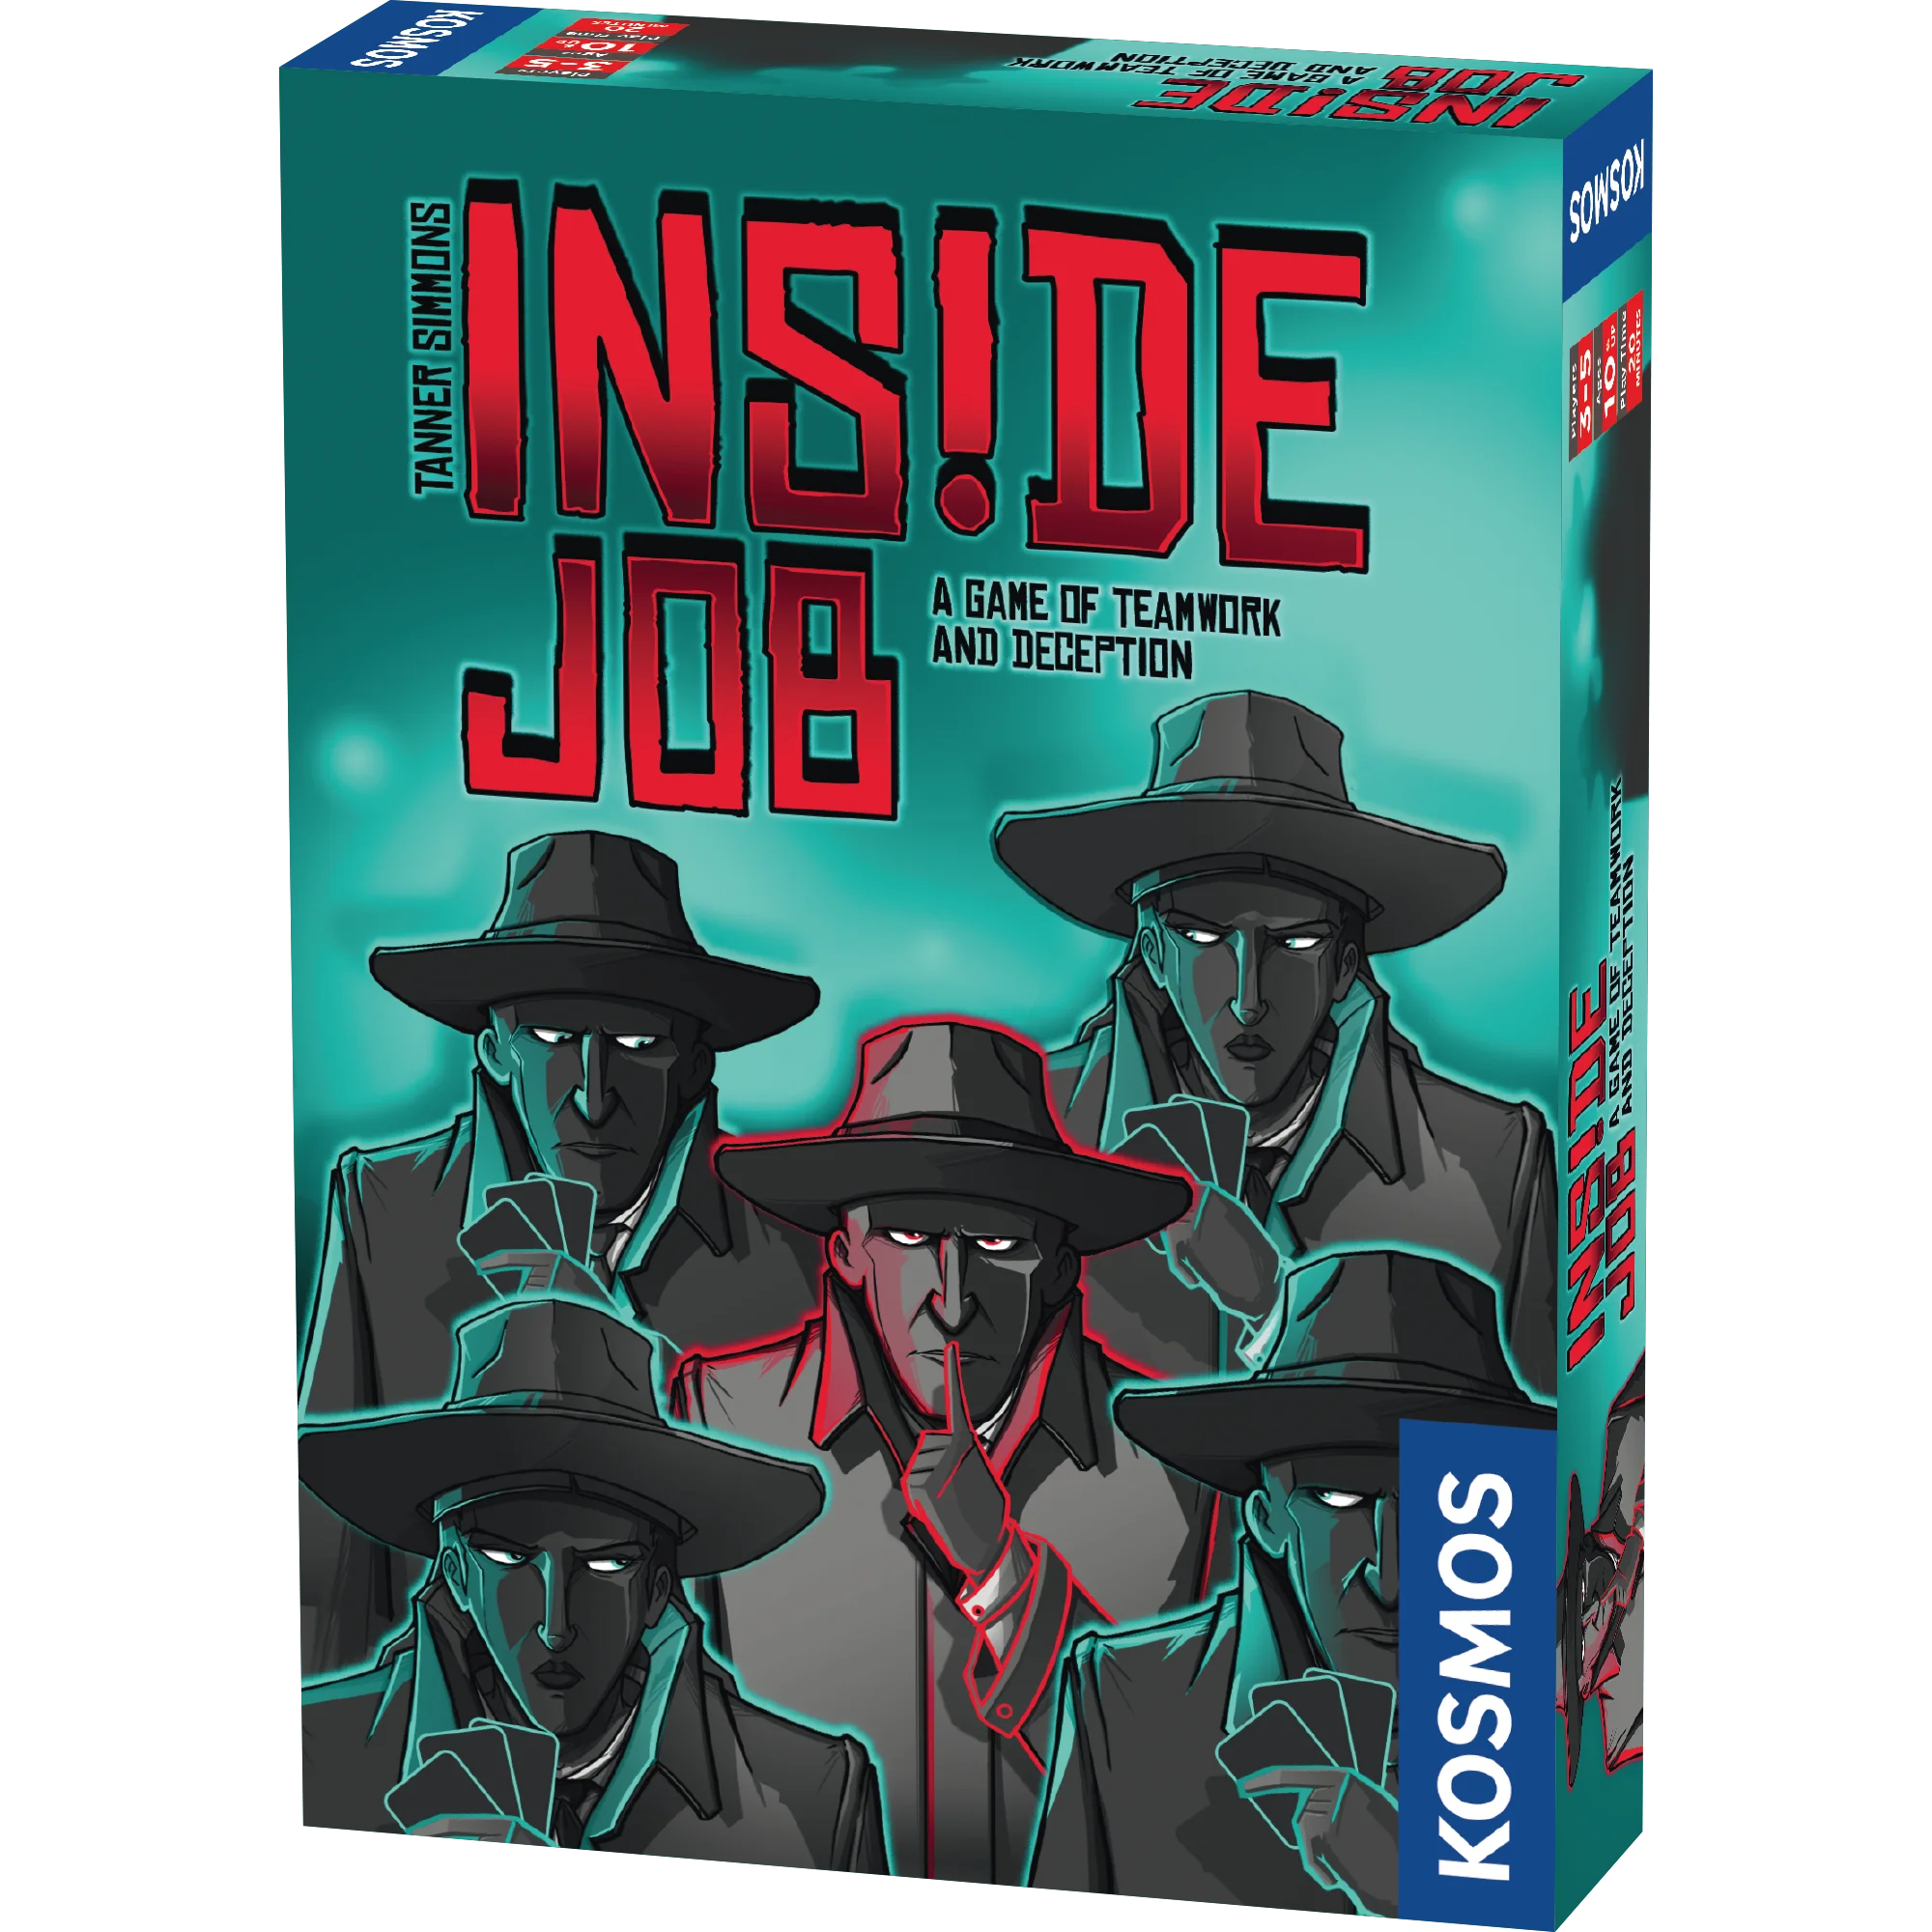 inside Job box cover showing the front cover of the box